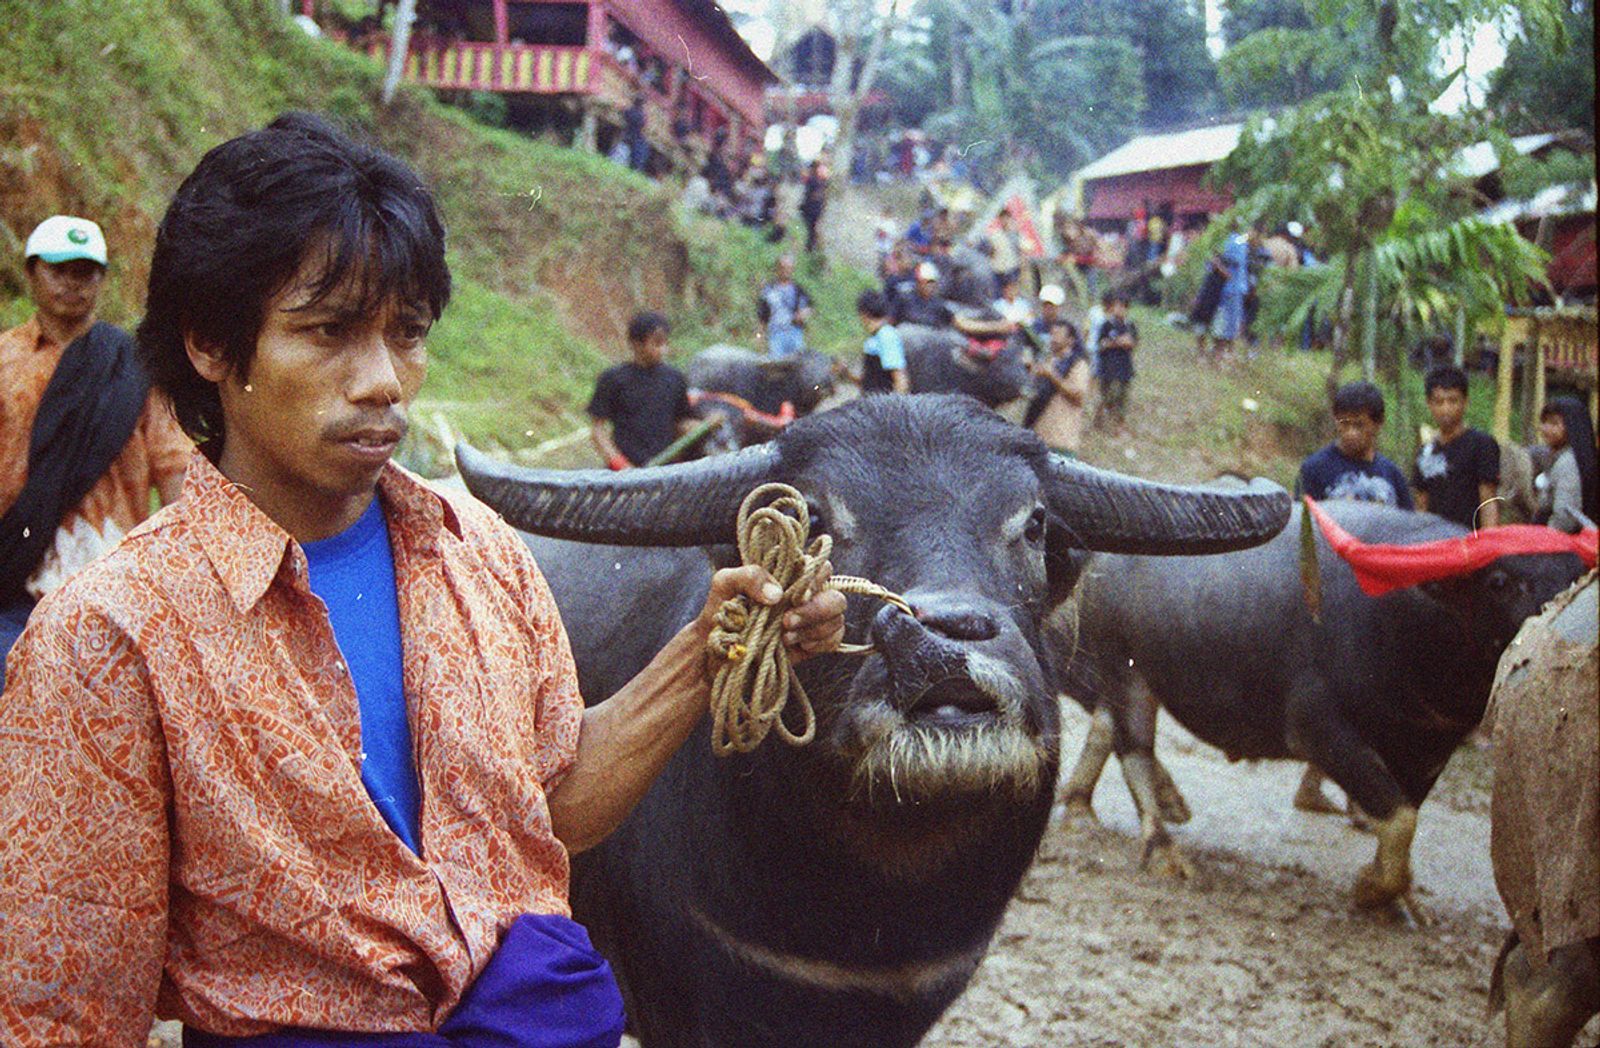 © Florent Roussel - Image from the TANA TORAJA photography project